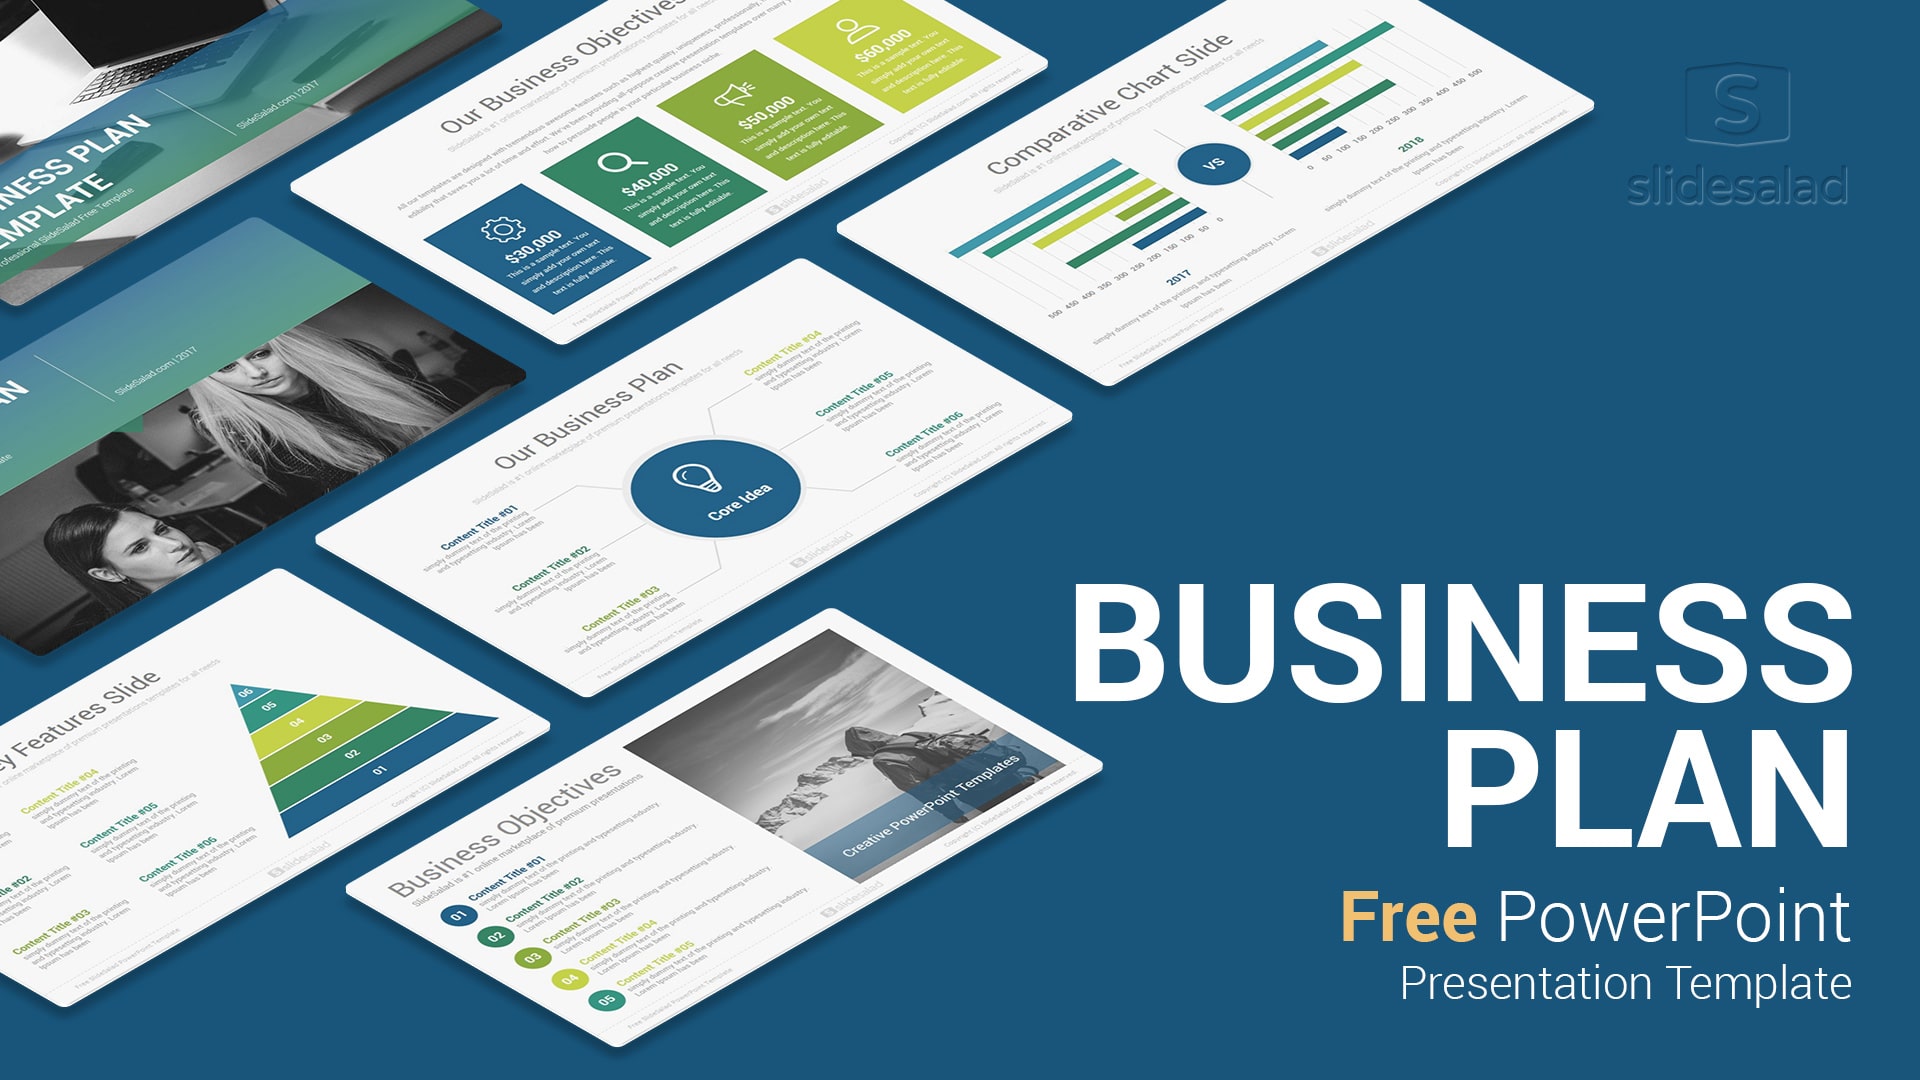 Business Plan Free PowerPoint Presentation Template - SlideSalad Throughout Business Plan Powerpoint Template Free Download